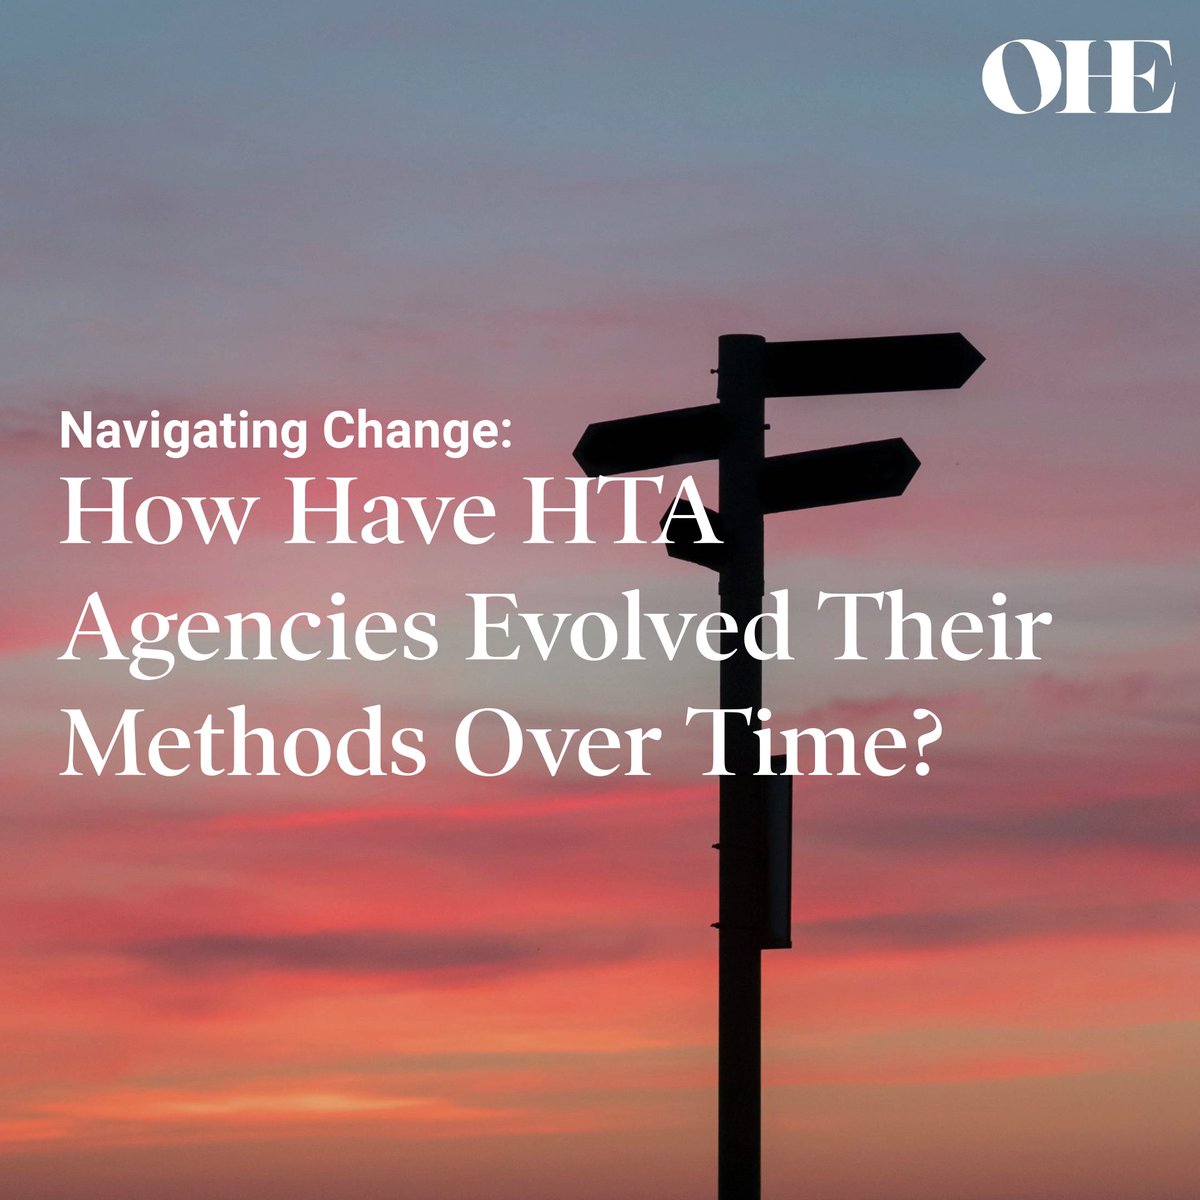 Discover how HTA agencies adapt methods in healthcare decision-making. Our report elaborates on HTA reforms implemented in 14 HTA agencies since 2010 and the drivers and barriers to changes in methods and processes. Read the report here: ohe.org/publications/h…